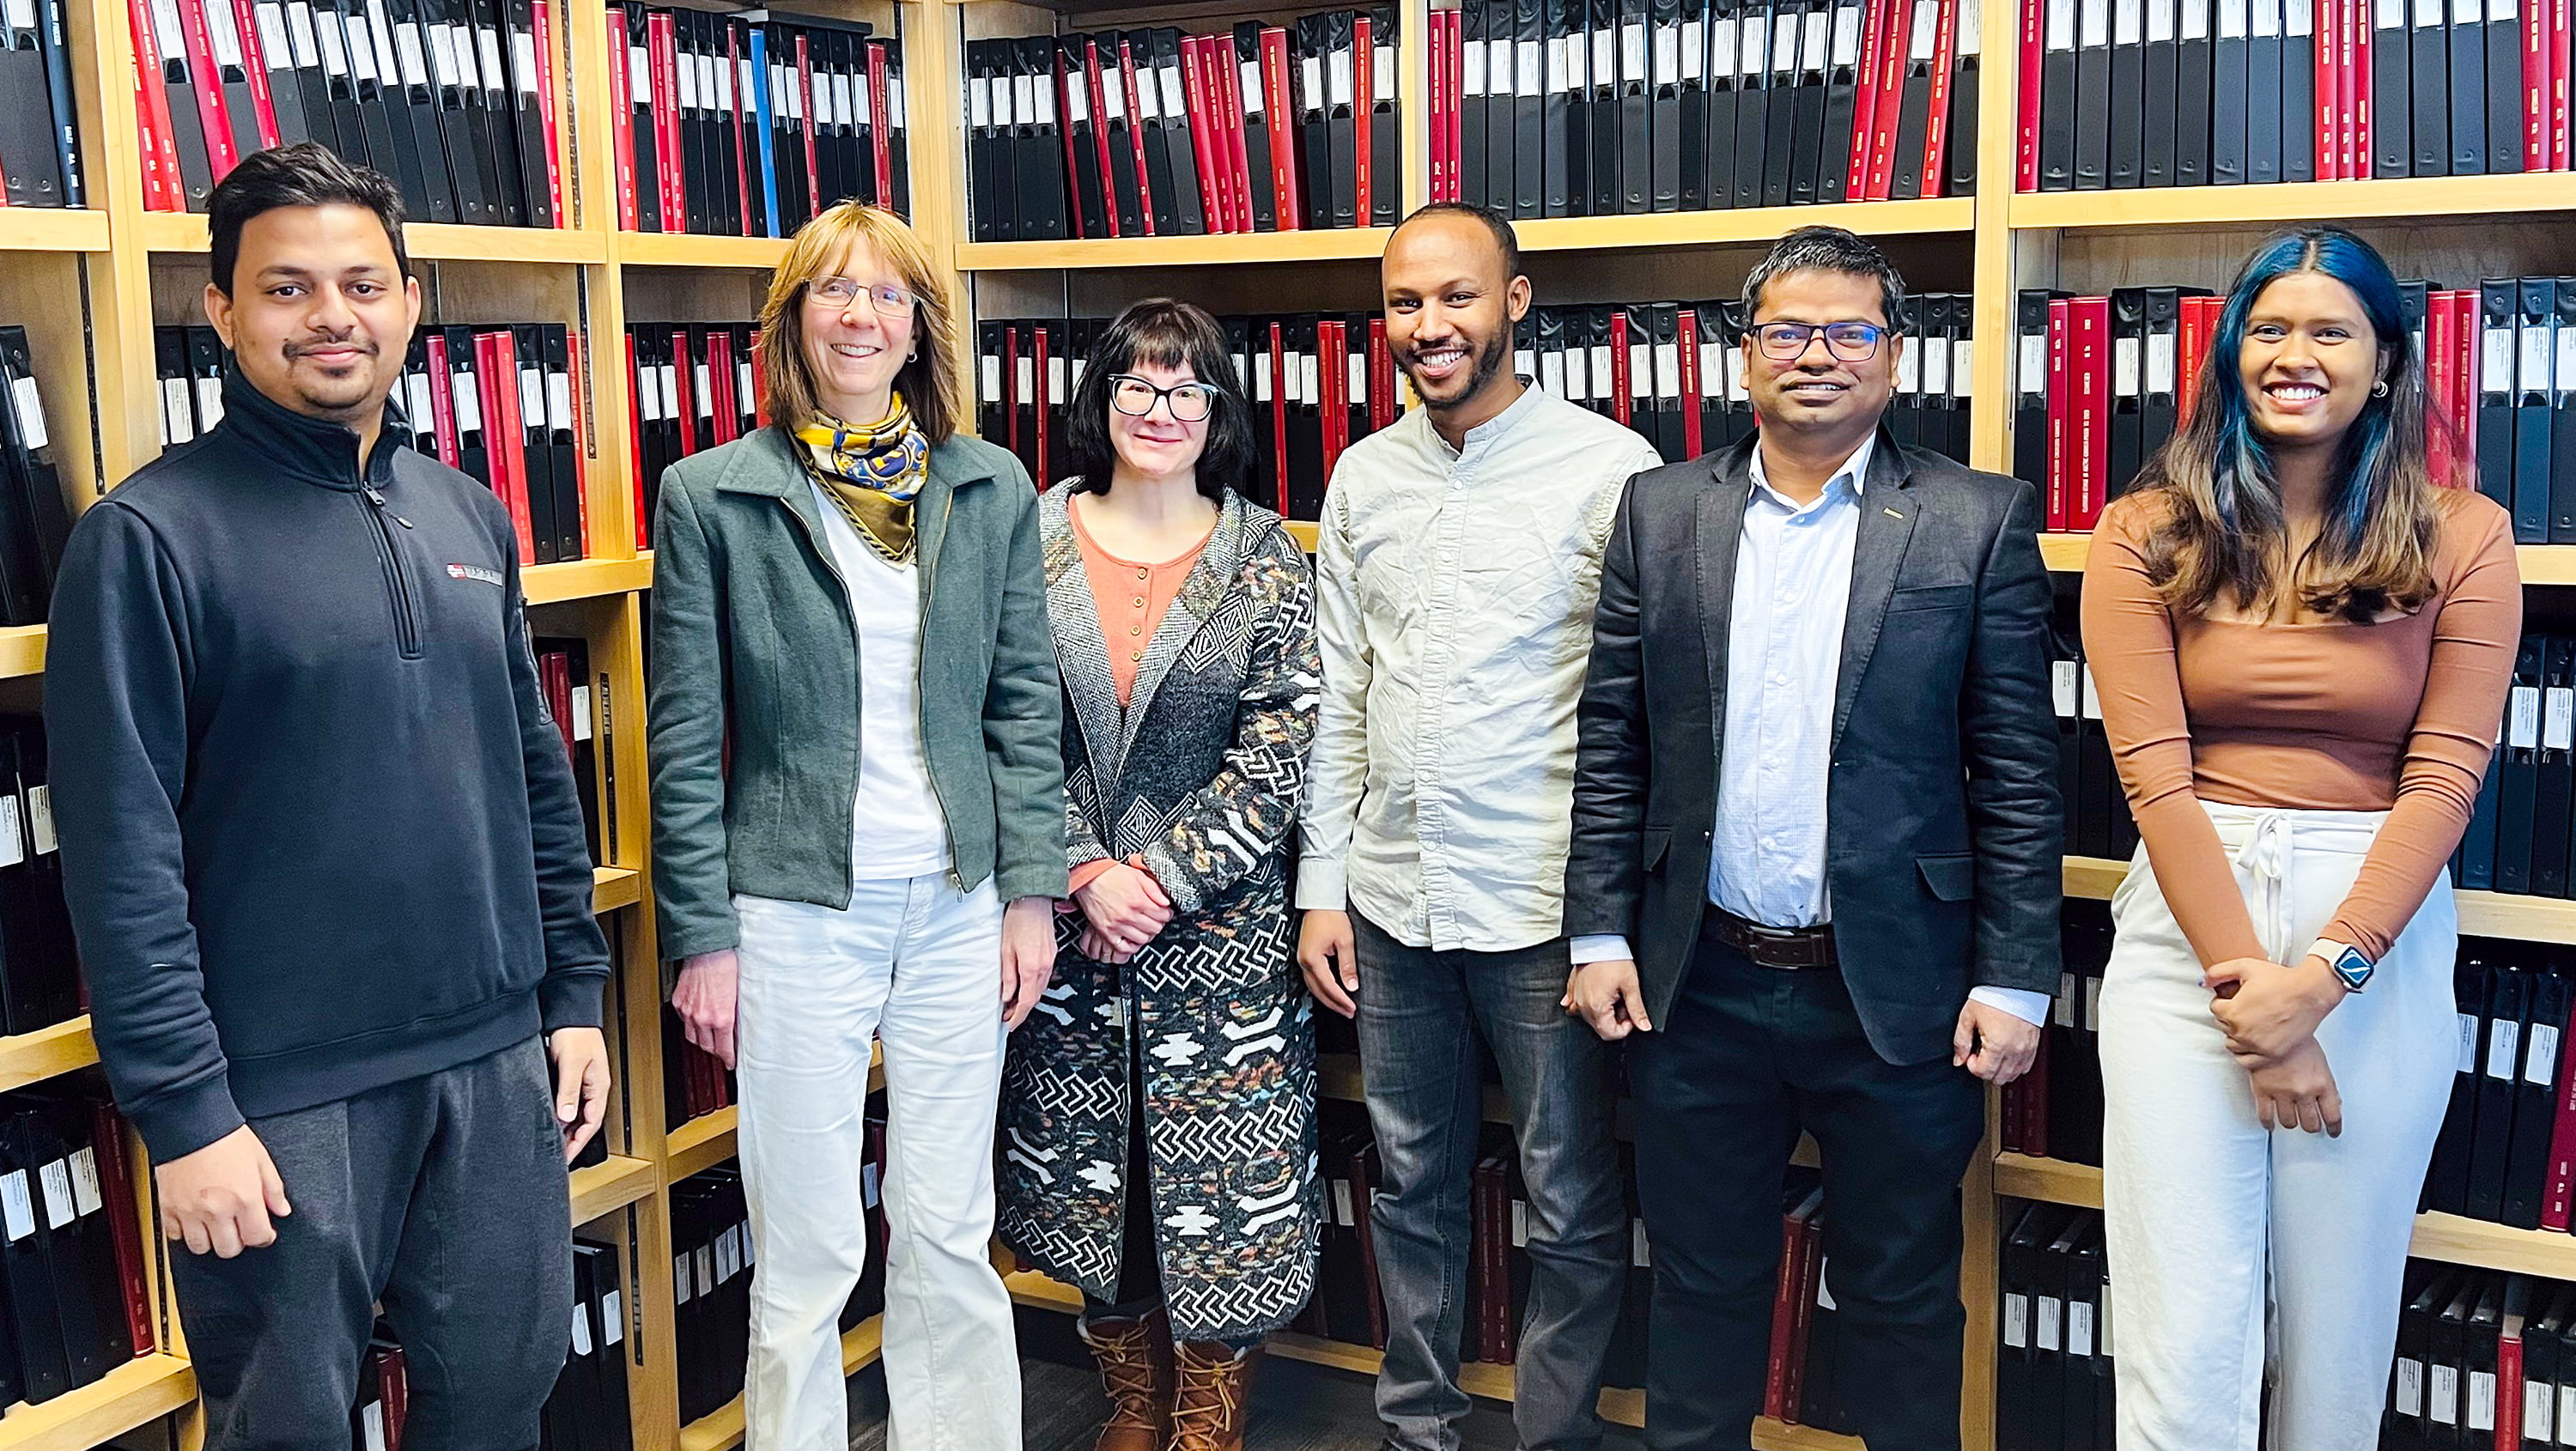 A U of A research team is exploring the most efficient way to process and manufacture specialized fibres from cellulose in Canadian-grown hemp. Left to right: Abu Sayed, research lead Patricia Dolez, Lelia Lawson, Dagen Haddis, Abdun Noor and Nadeesha Samaraweera. (Photo: Supplied)